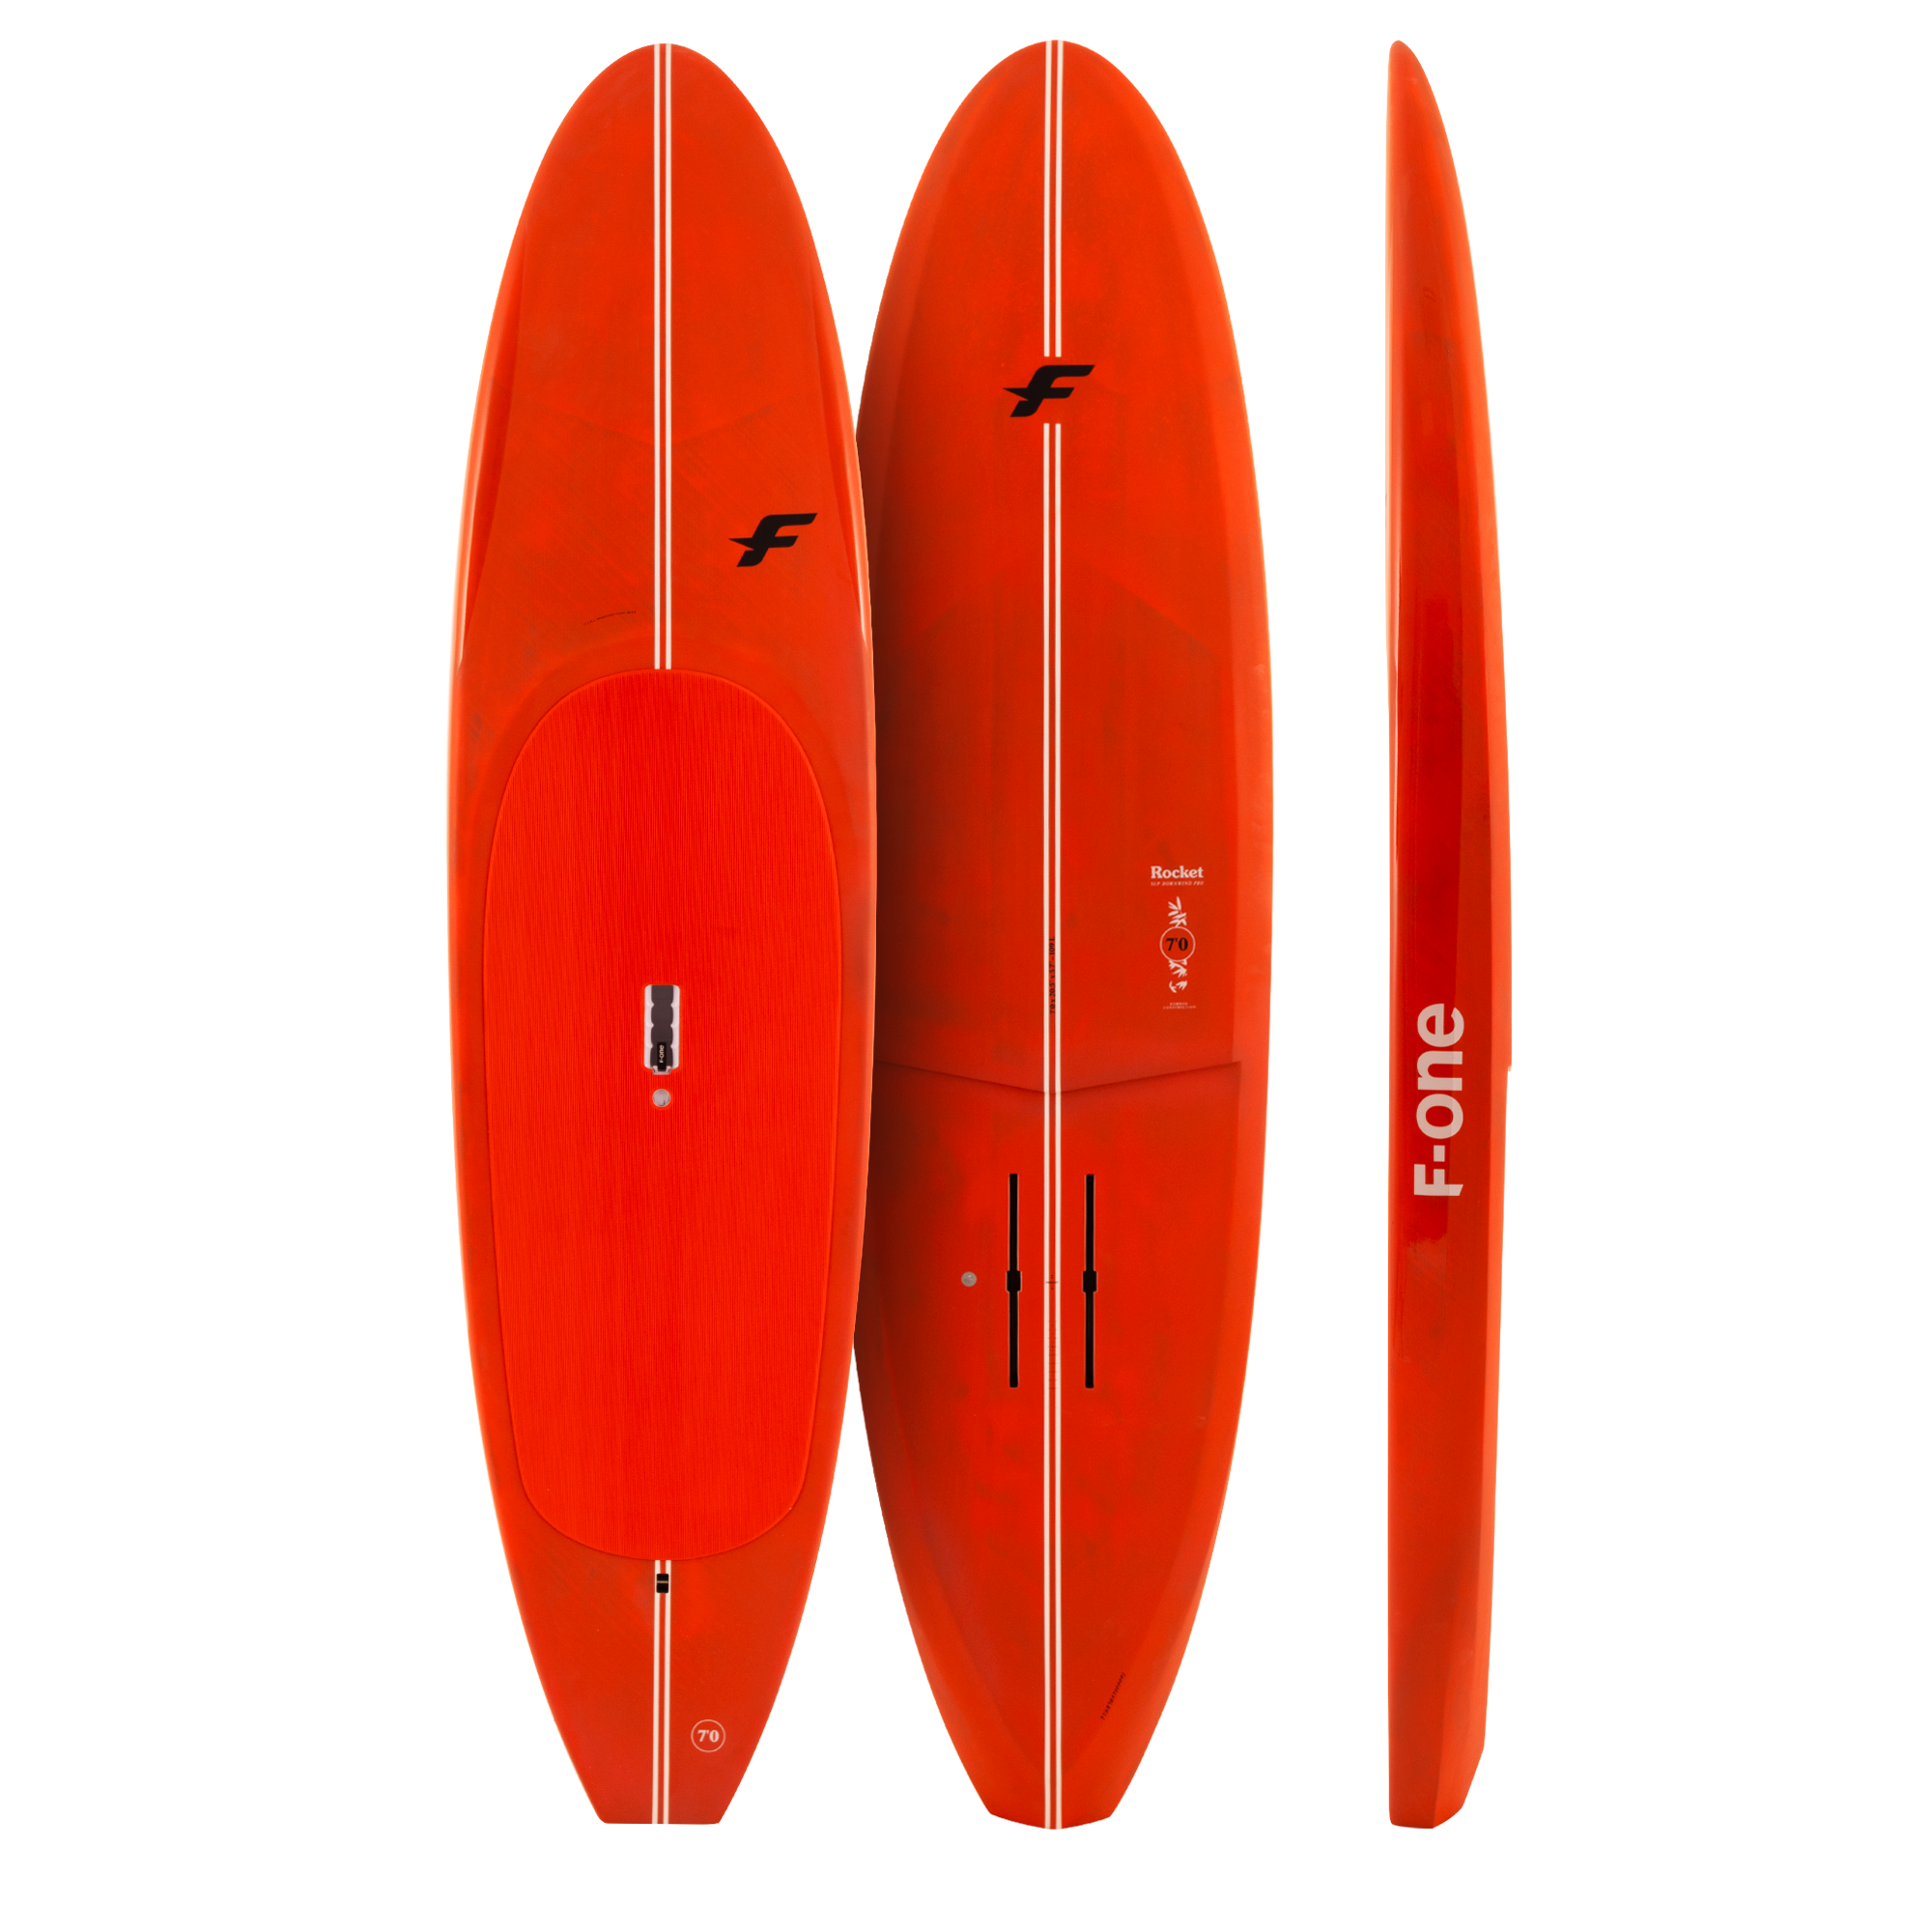 F-One Rocket SUP DW Pro Bamboo 20"